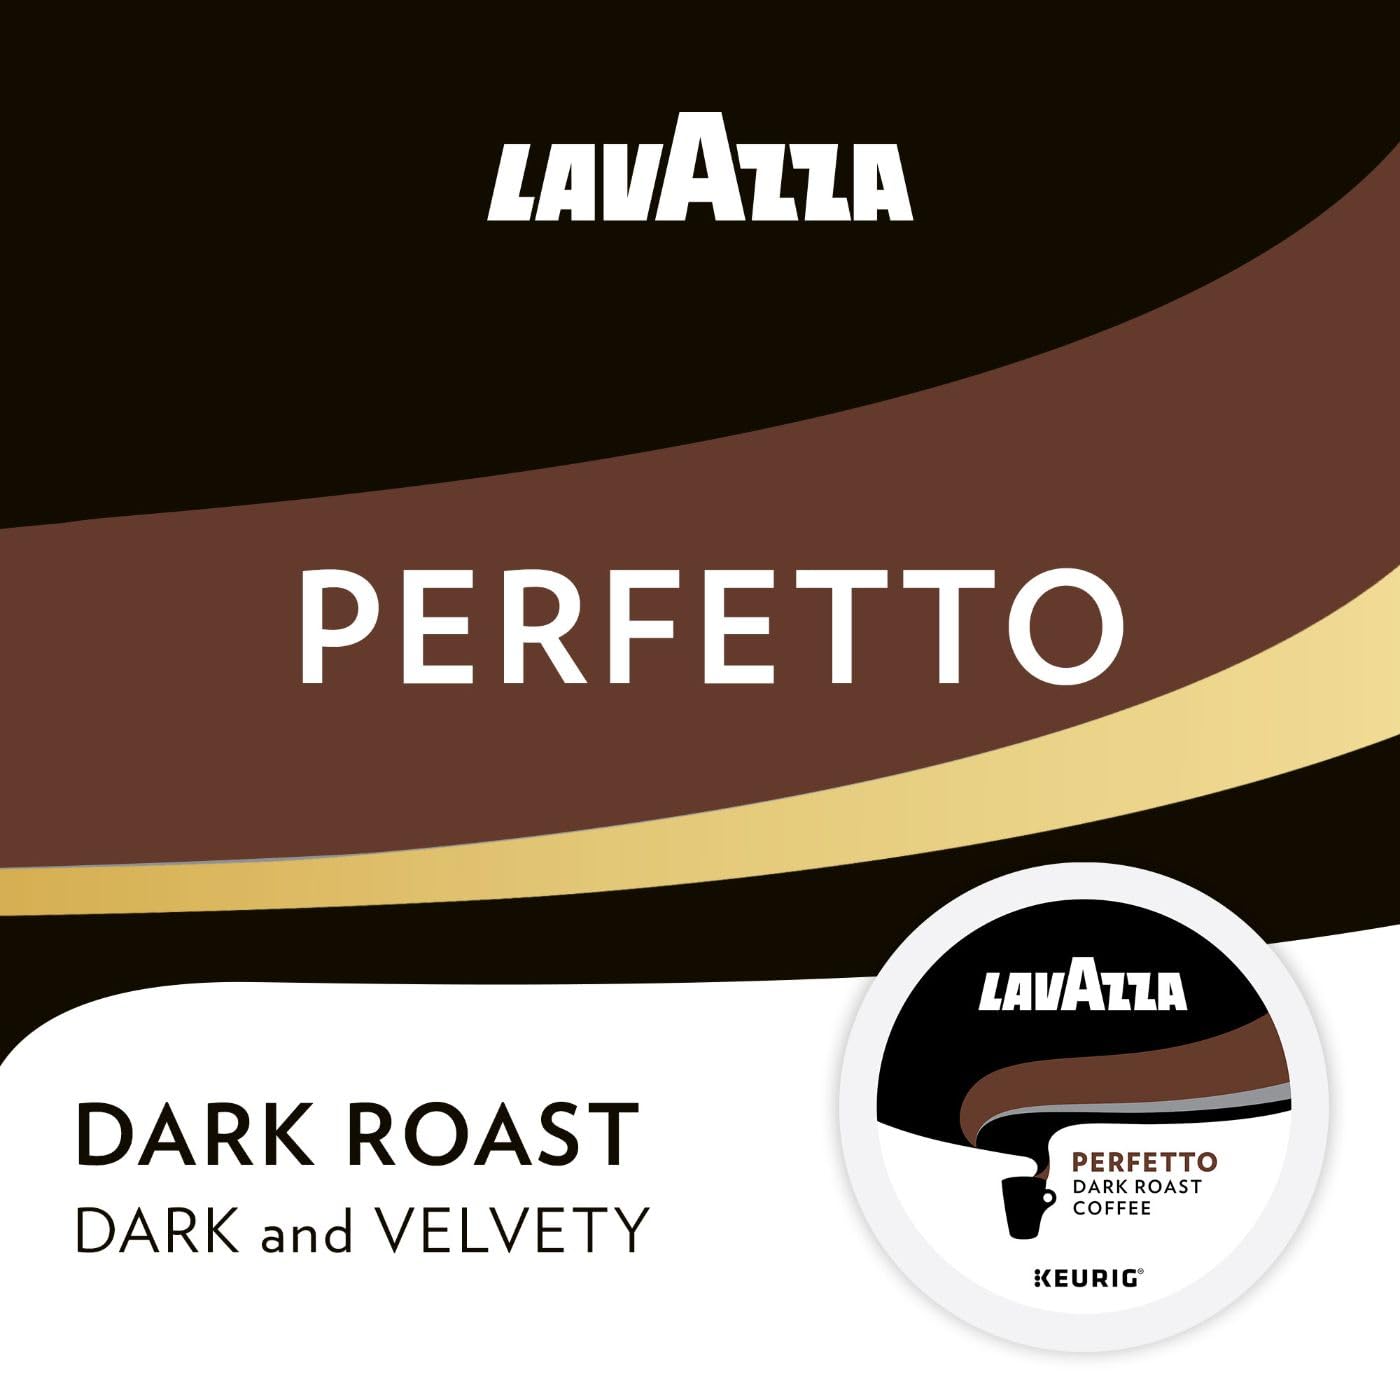 Lavazza Perfetto Single-Serve Coffee K-Cup® Pods for Keurig® Brewer, 32 Count, Full-bodied dark roast with bold, dark flavor and notes of caramel, 100% Arabica